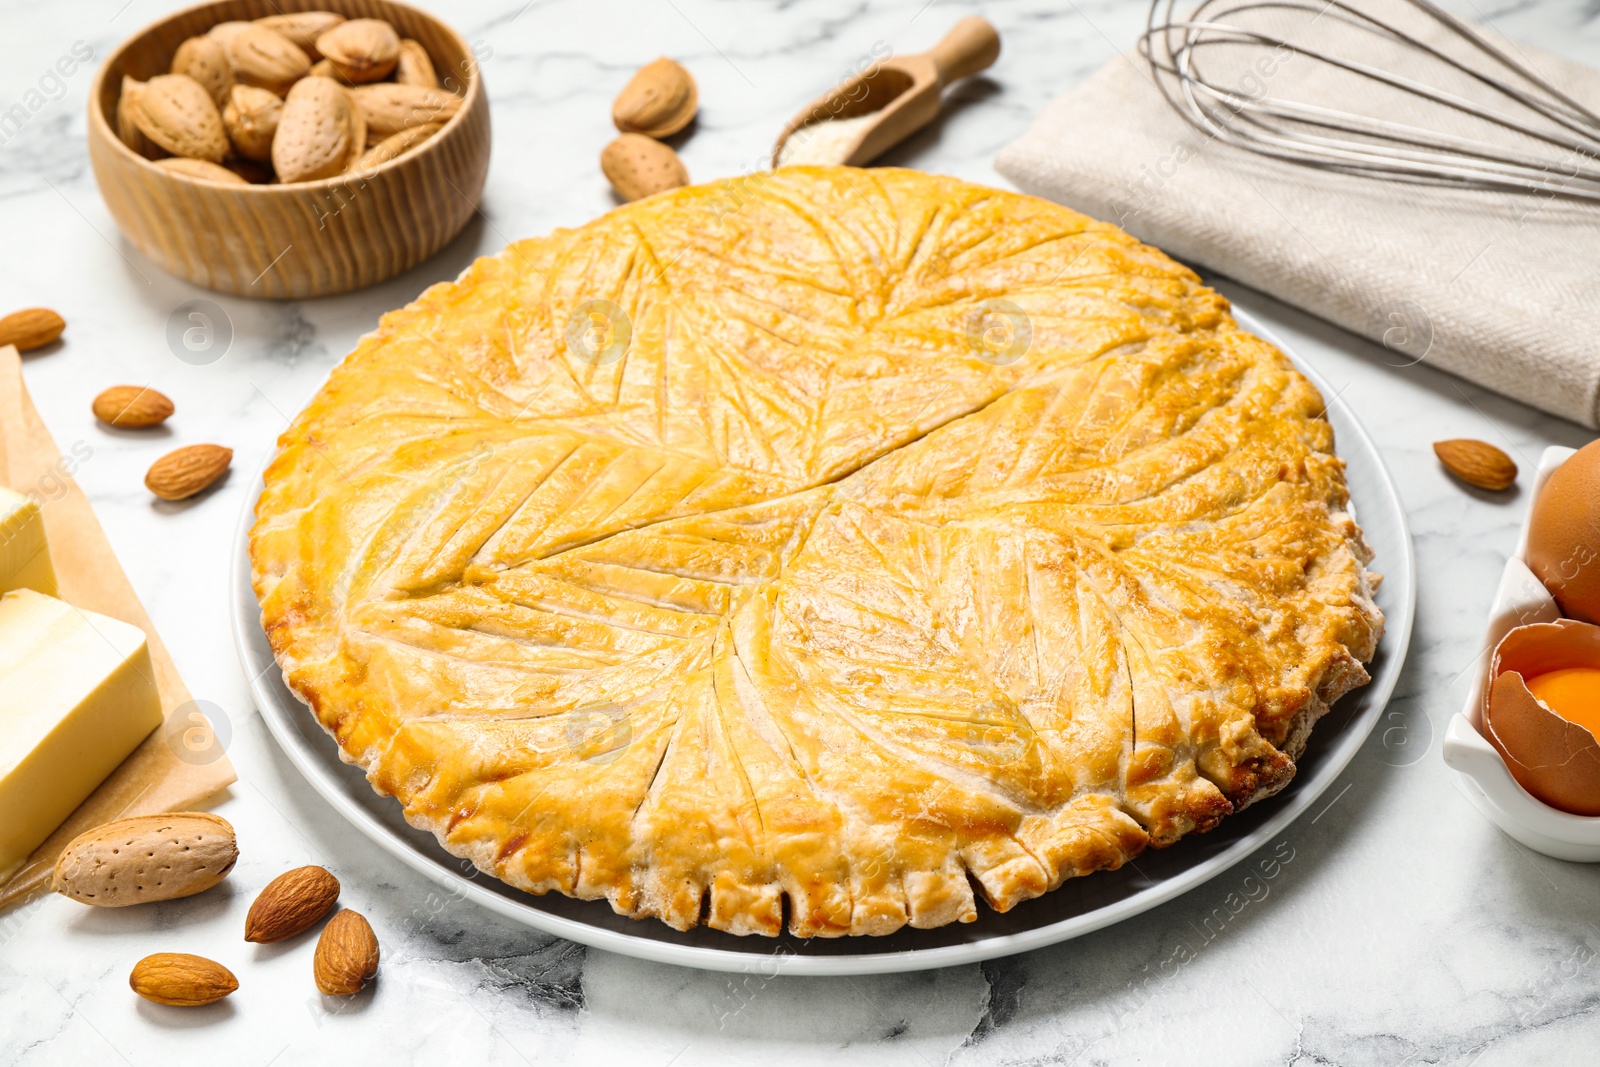 Photo of Traditional galette des rois and ingredients on white marble table